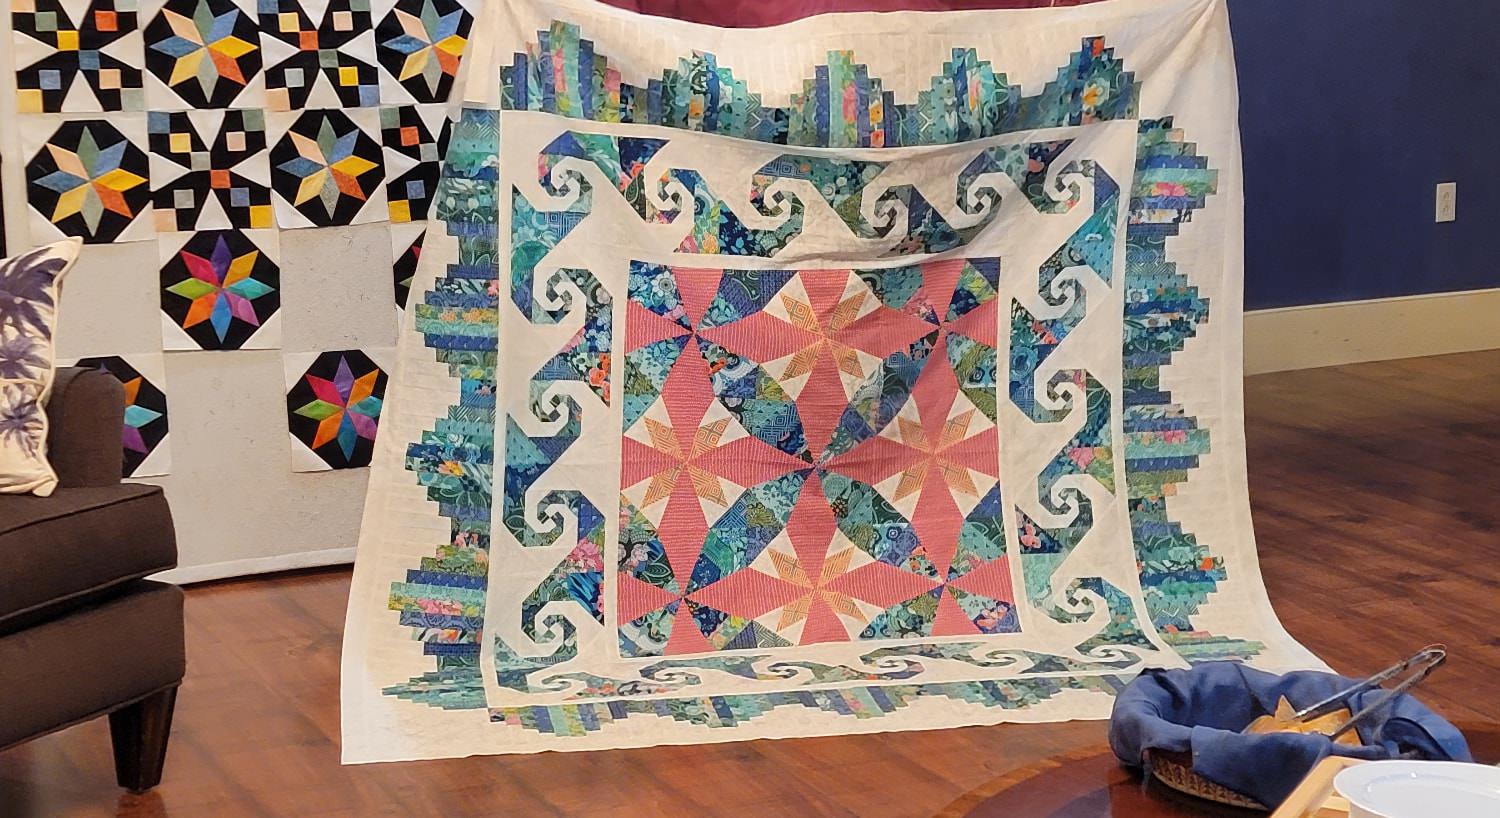 Multicolored quilt hanging on display